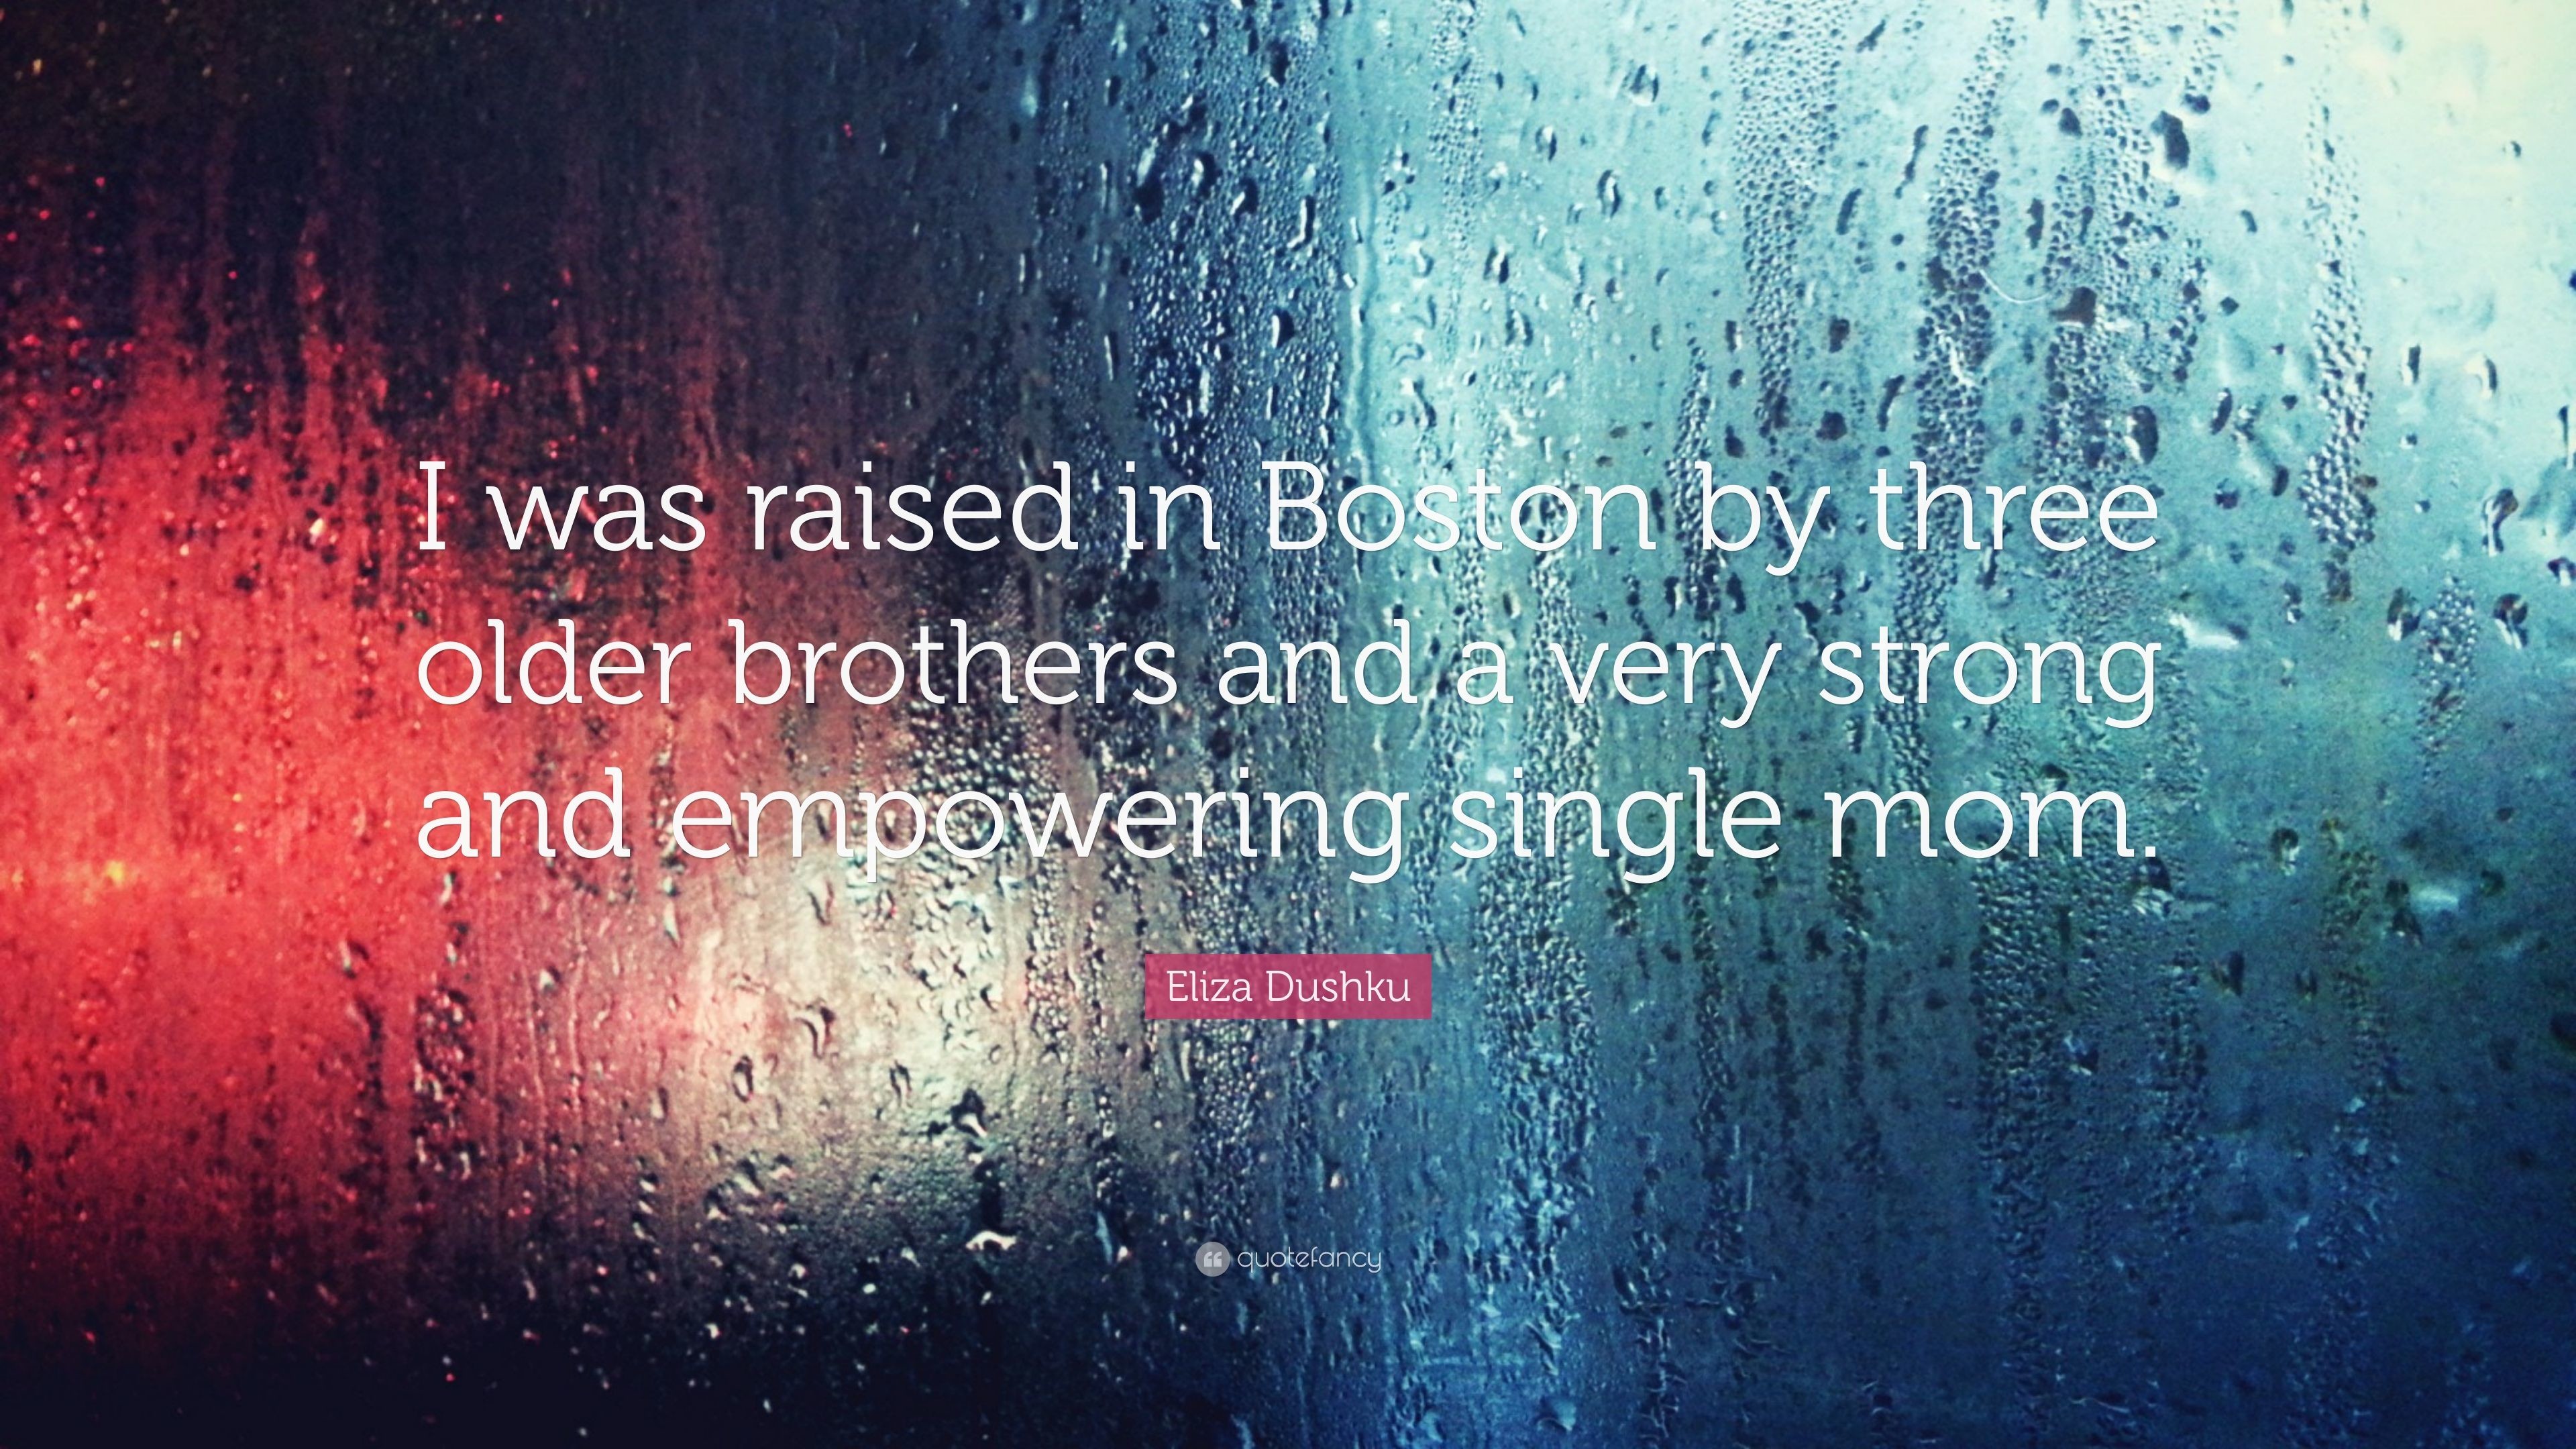 3840x2160 Eliza Dushku Quote: “I was raised in Boston by three older brothers and a